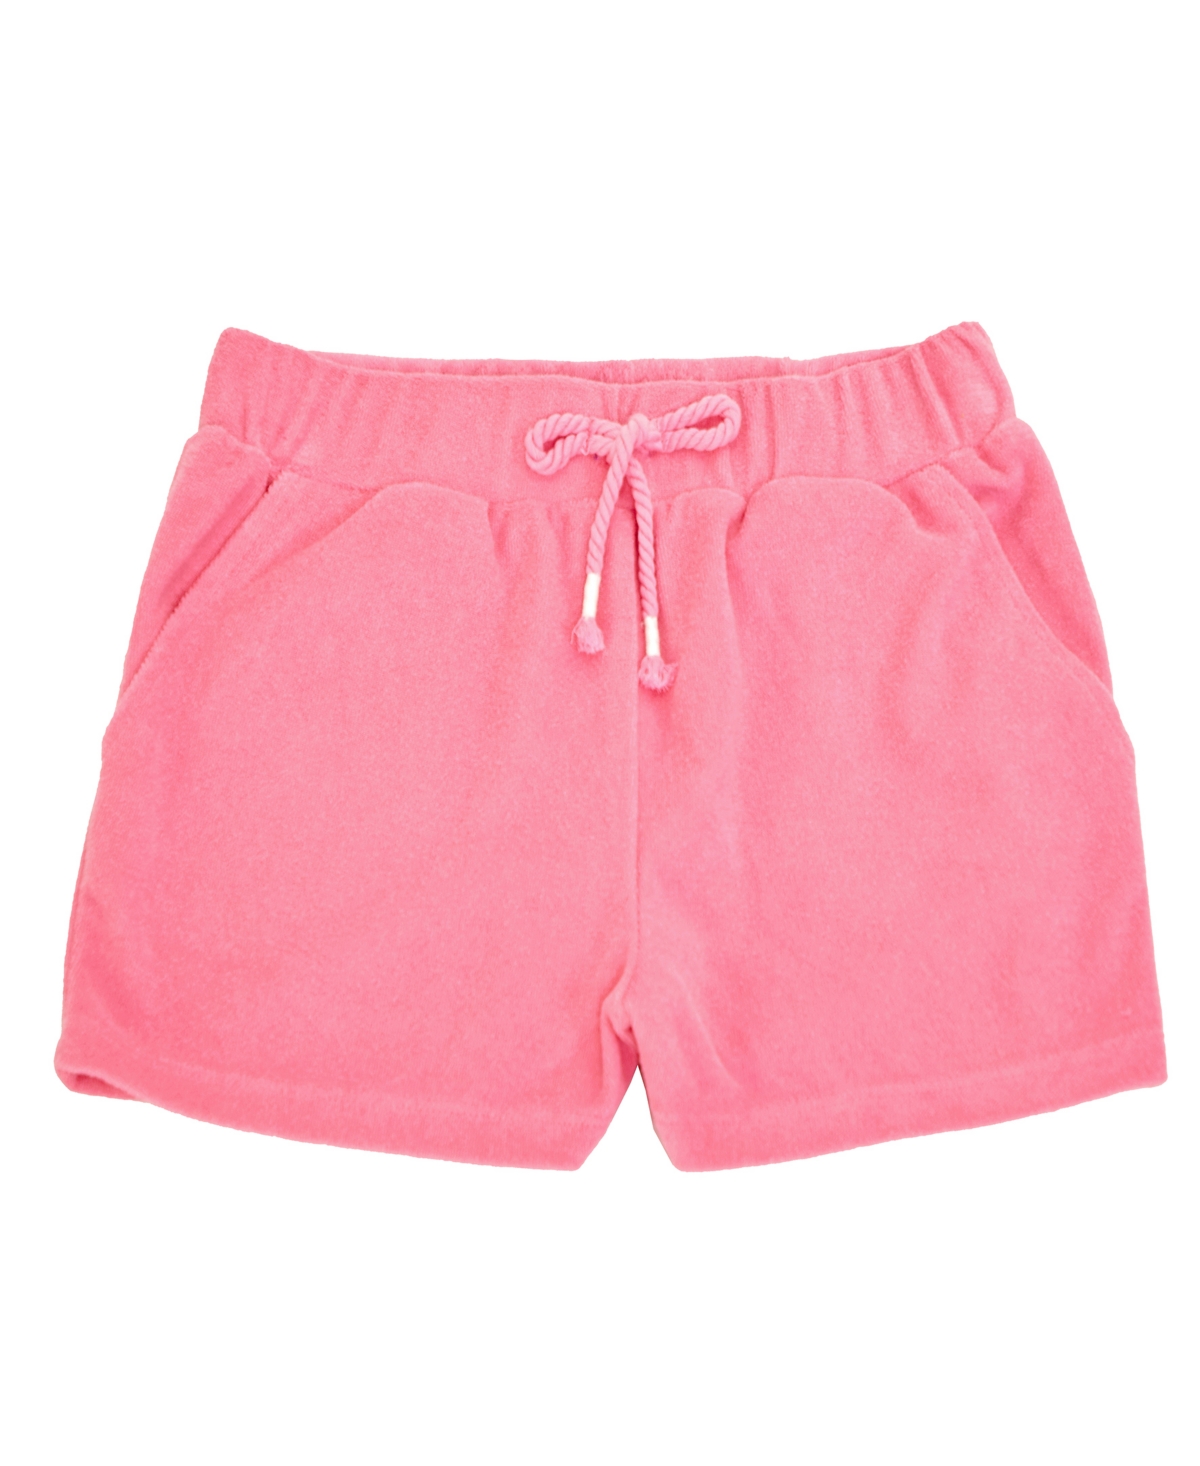 3T Epic Threads Pink Shorts Ranking TOP9